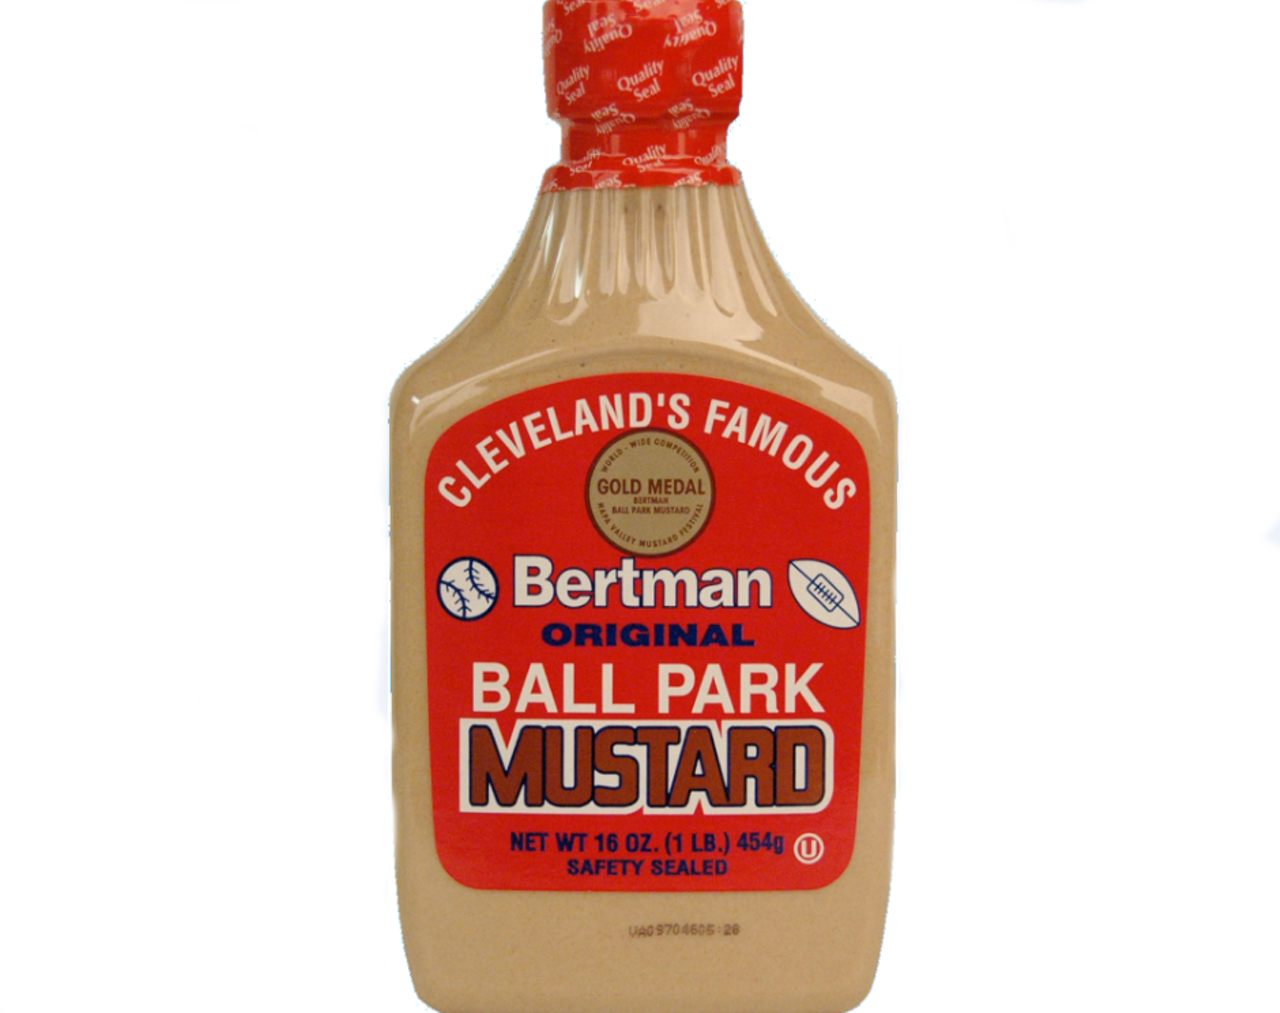 Bertman's Original Ballpark Mustard
What: The brown sauce we grew up with while watching the Tribe at Municipal Stadium, the Jake, and Progressive Field
Why: The sports-associated condiment has deep roots in Cleveland, with Bertman's battling its rival, Authentic Stadium Mustard, for fans' loyalty
Where: Find it smothered on Fat Head's Brewery's Brewben pastrami sandwich or layered on a Happy Dog hot dog topped with Spaghetti-O's as a hat tip to native son Chef Boyardee